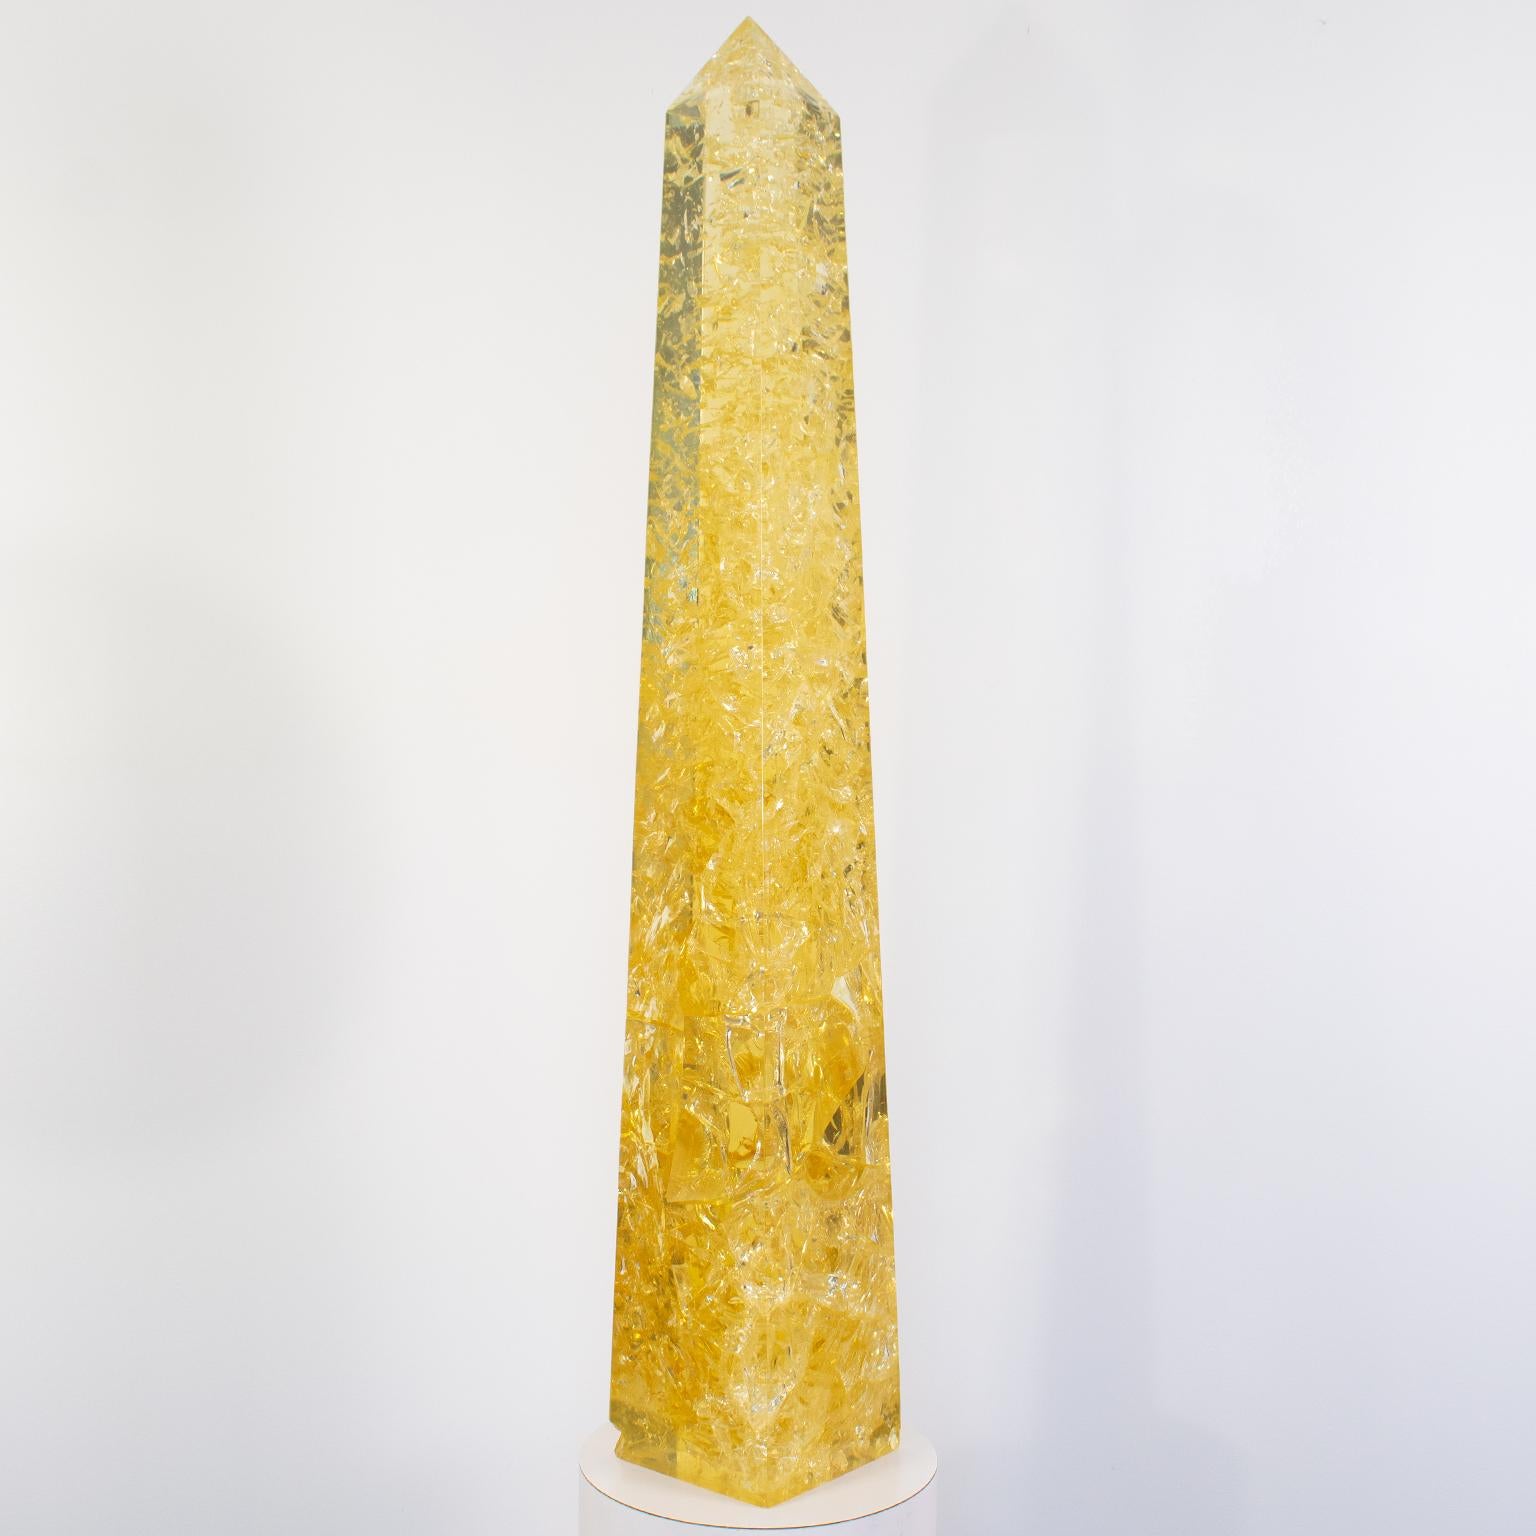 This spectacular oversized fractal resin obelisk was hand-crafted in Europe, and its design is frequently attributed to Pierre Giraudon from the 1970s. Using a specialized process that applies electricity to harden the resin, this piece by Belgian